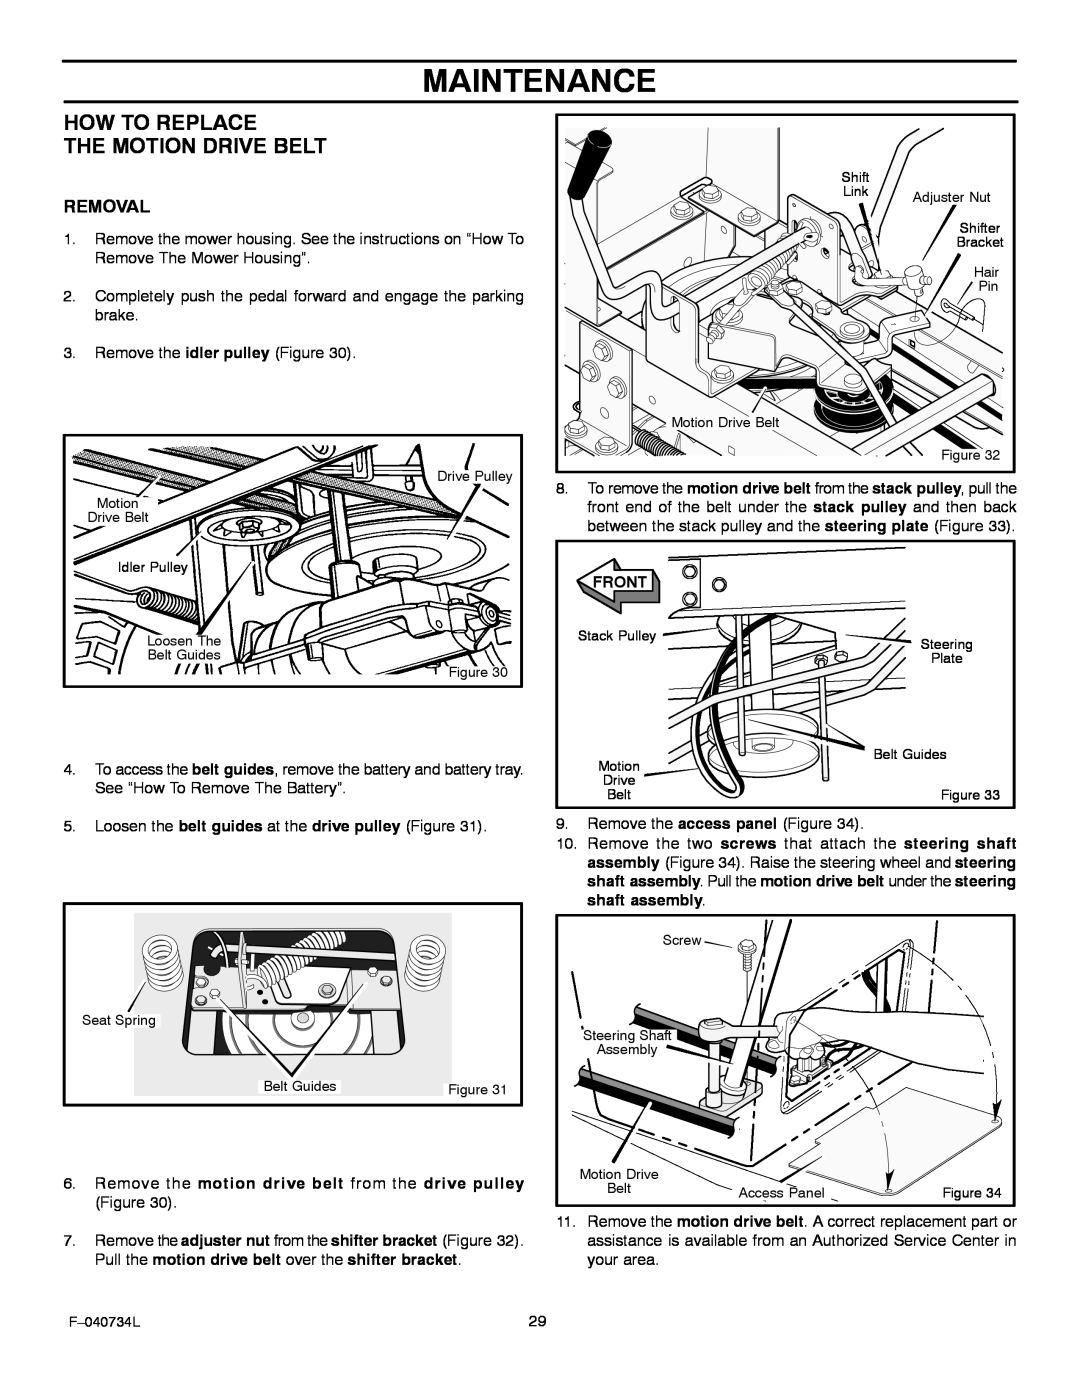 Murray 425015x92A manual Maintenance, How To Replace The Motion Drive Belt, Removal 